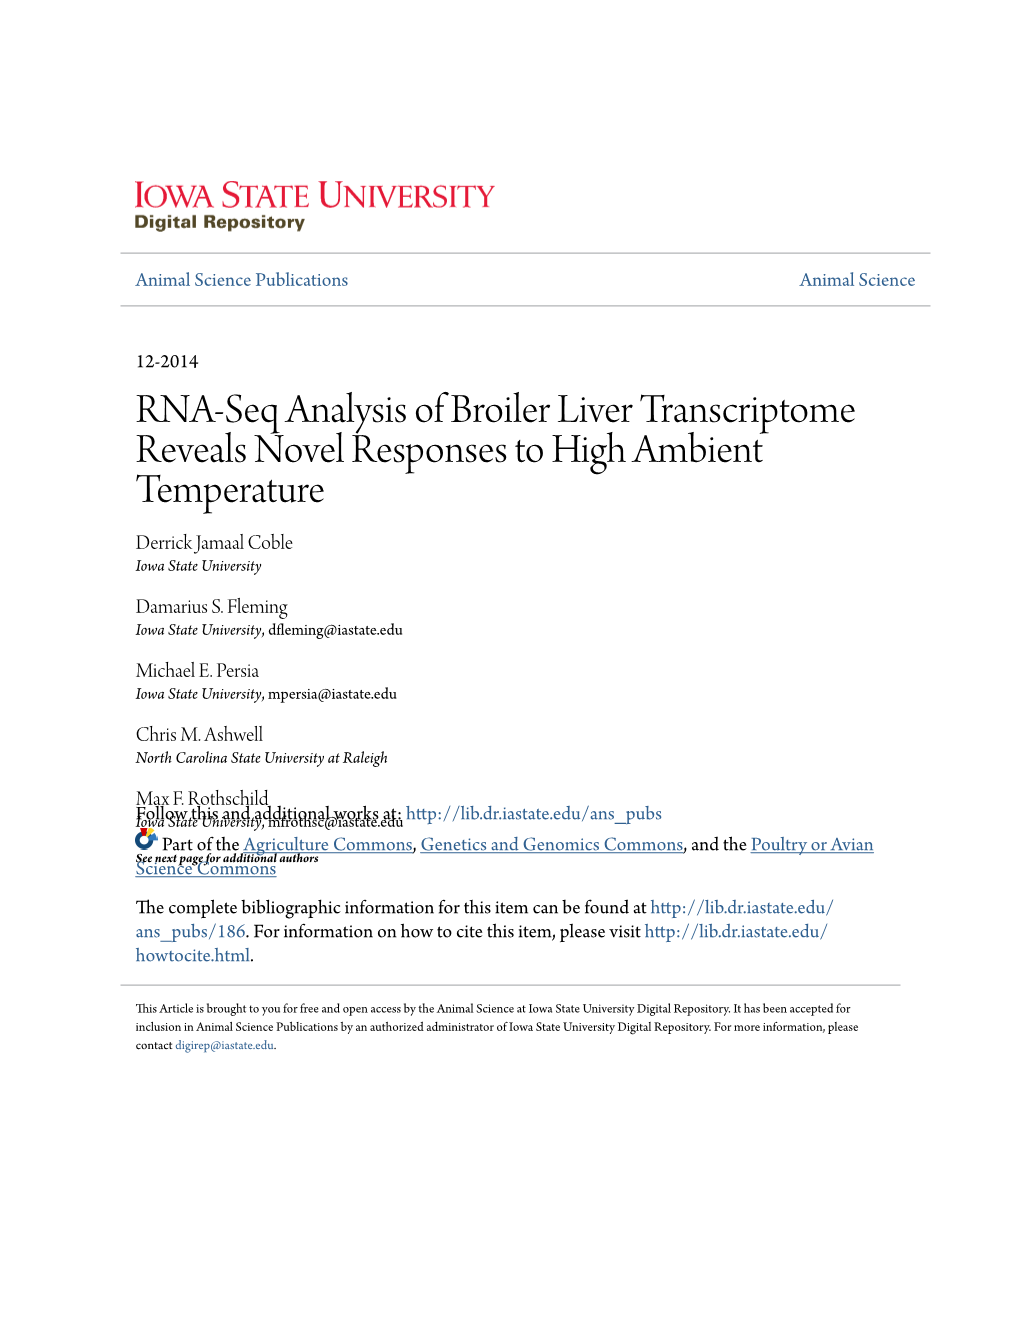 RNA-Seq Analysis of Broiler Liver Transcriptome Reveals Novel Responses to High Ambient Temperature Derrick Jamaal Coble Iowa State University